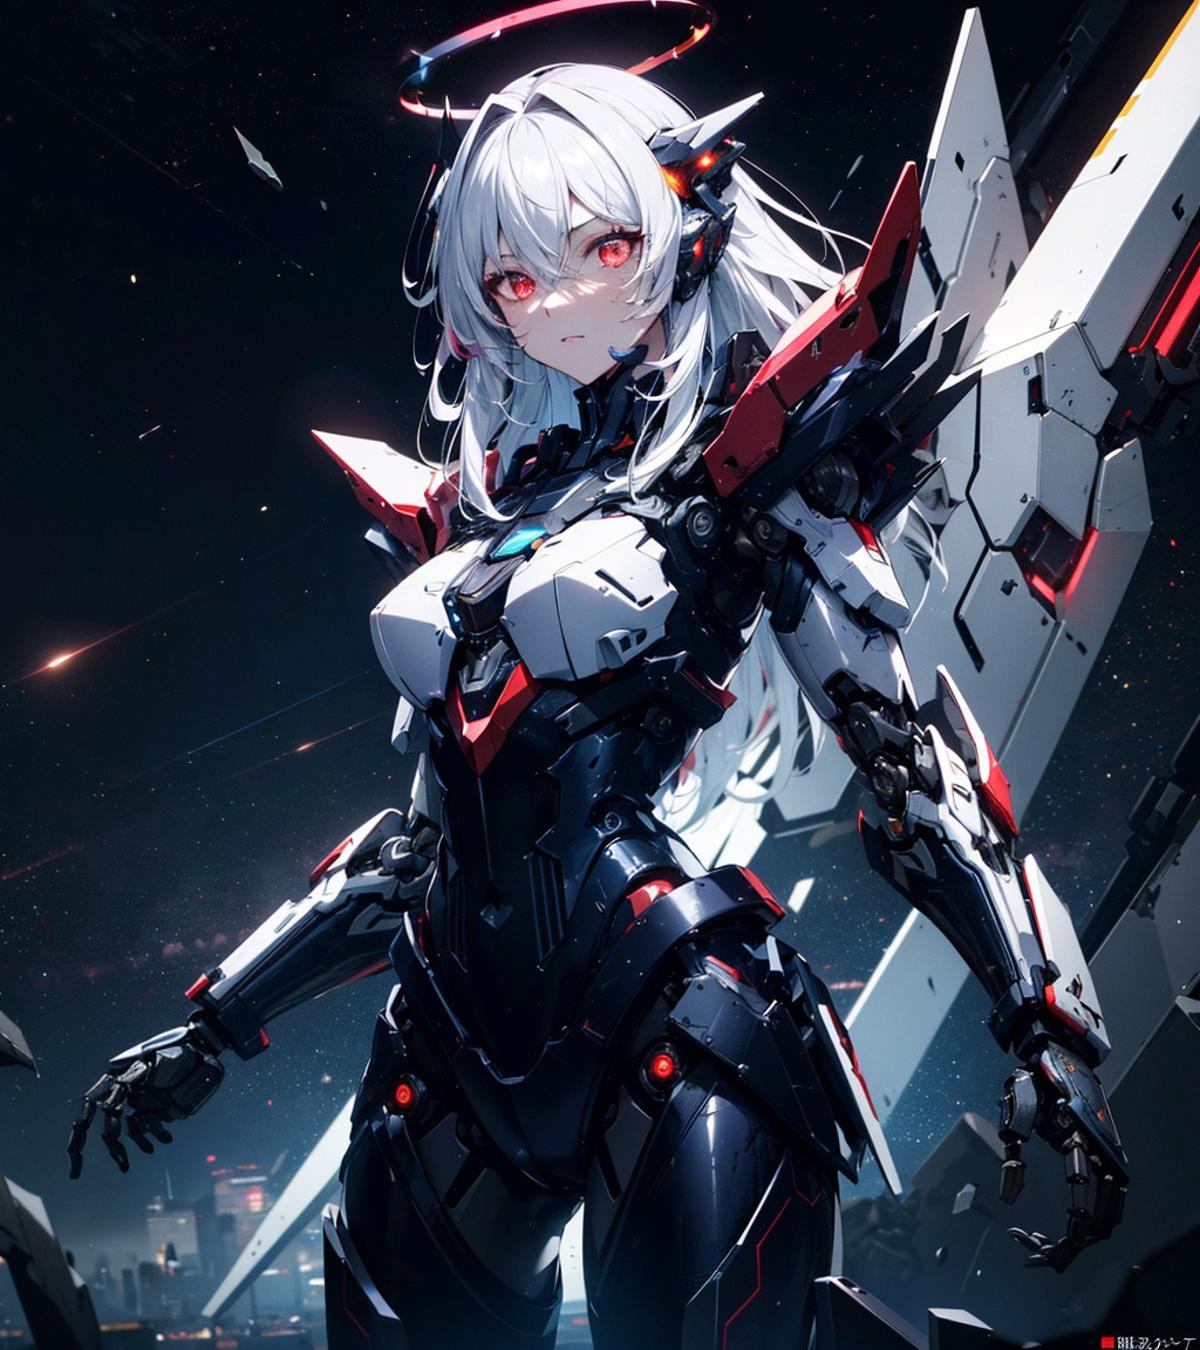 Anime-style robotic woman in black and white armor with red eyes.